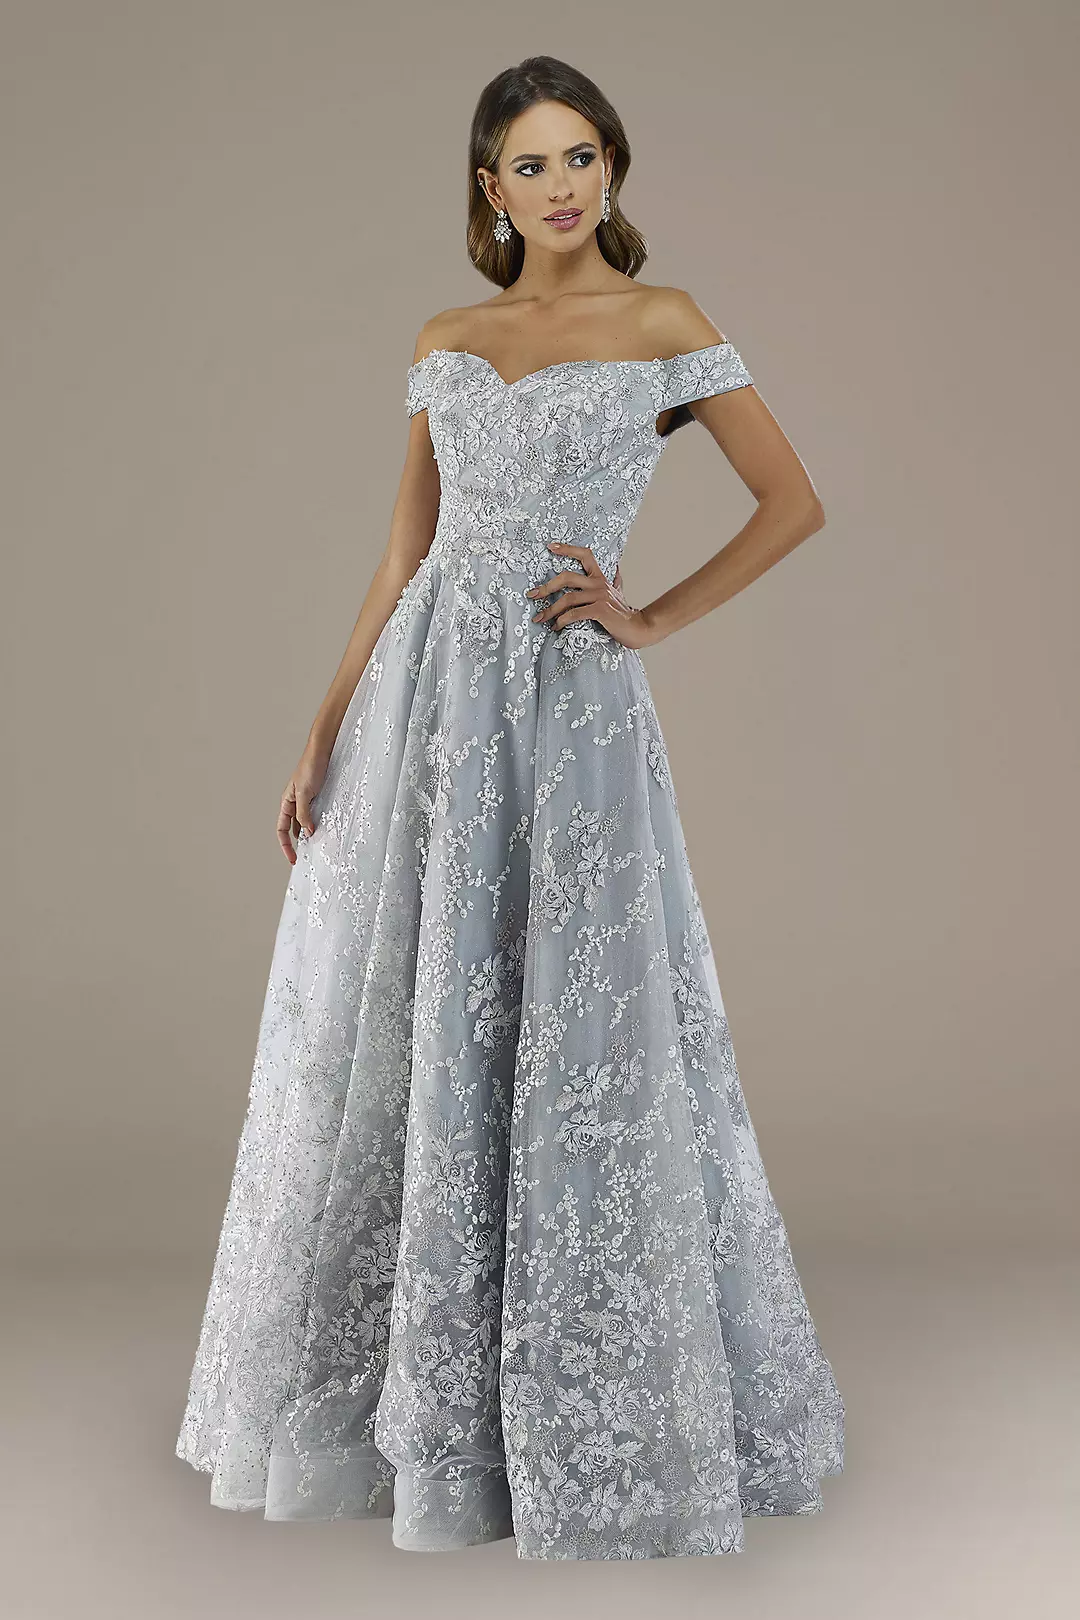 Lara Everly Off-the-Shoulder Lace Ball Gown Image